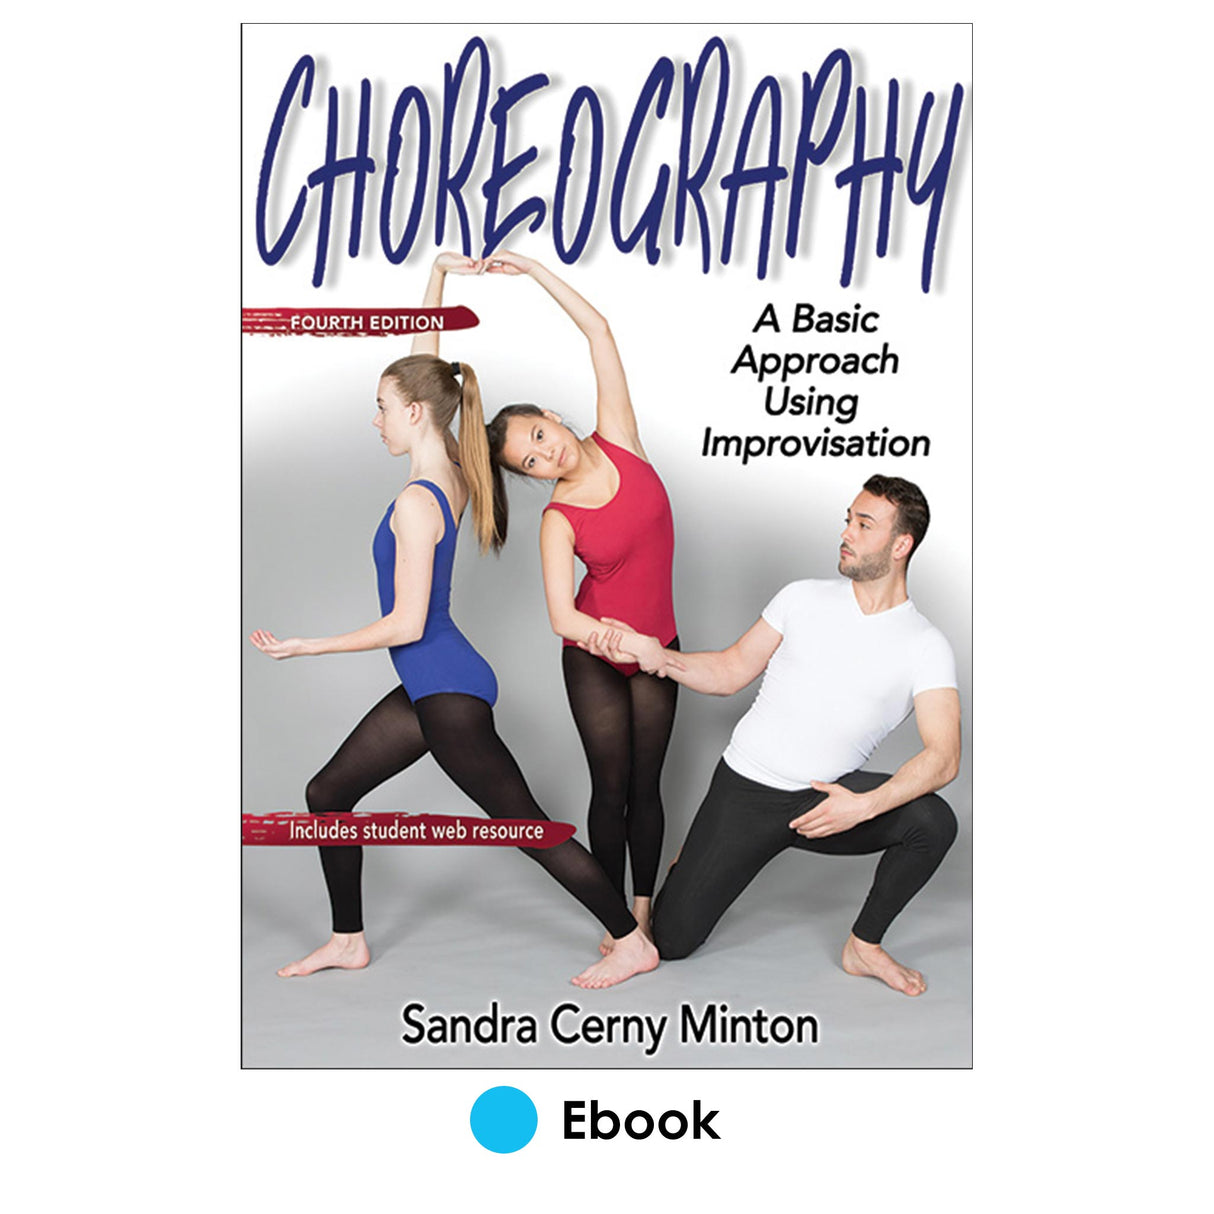 Choreography 4th Edition PDF With Web Resource